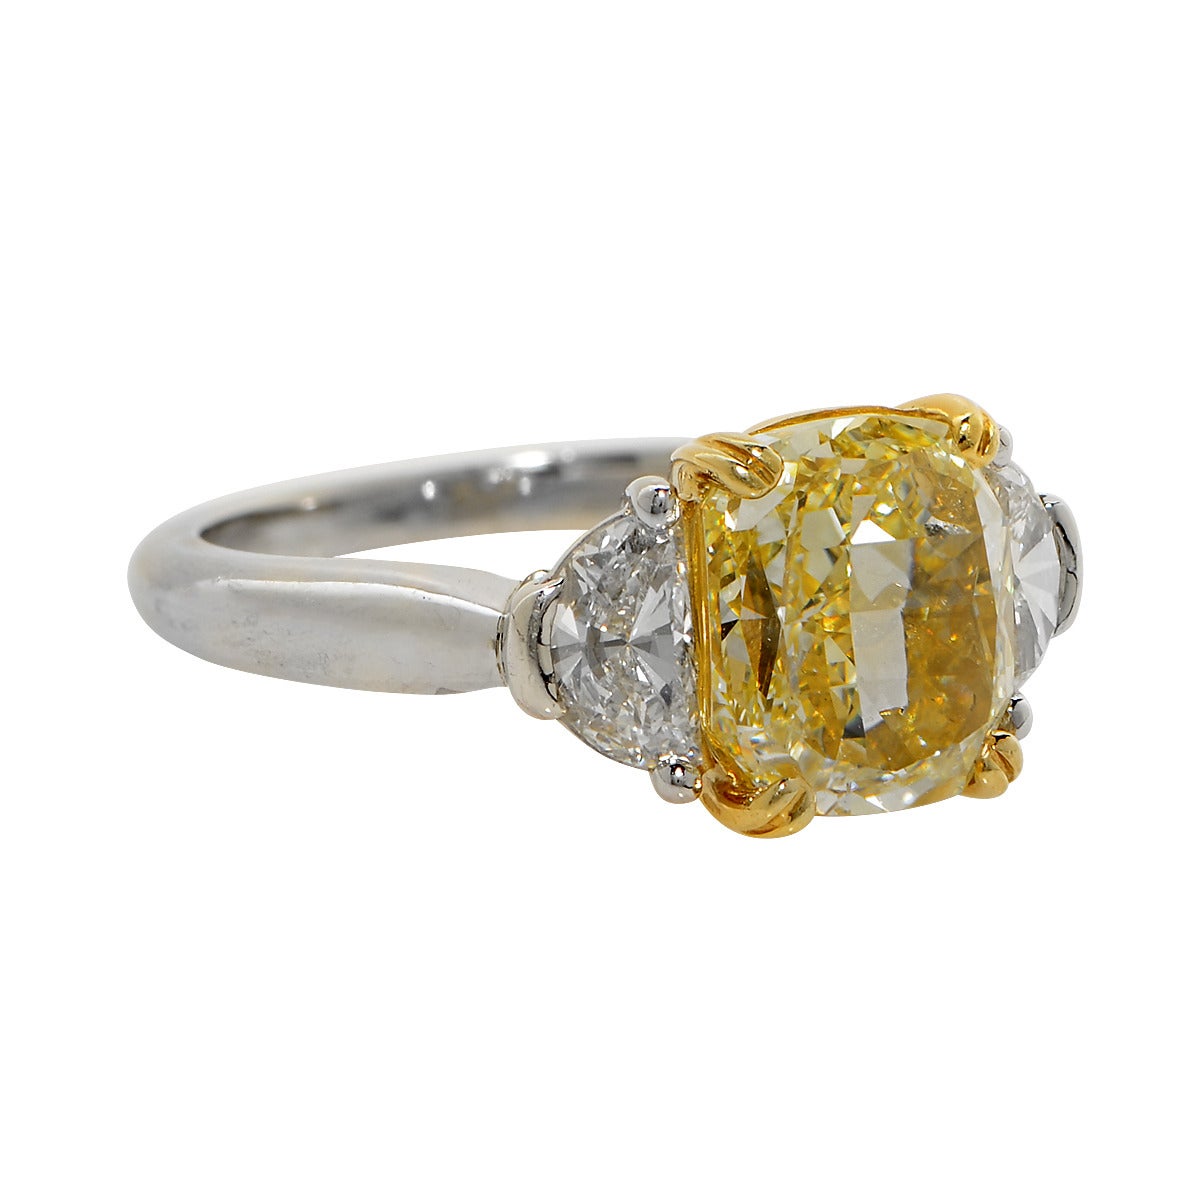 Platinum & 18k Yellow Gold Ring Set with a GIA 3.64ct Fancy Light Yellow SI1 Cushion Cut Diamond, Flanked by 2 Half Moon Cut Diamonds Weighing Approximately .75cts. Ring Size: 6.25.